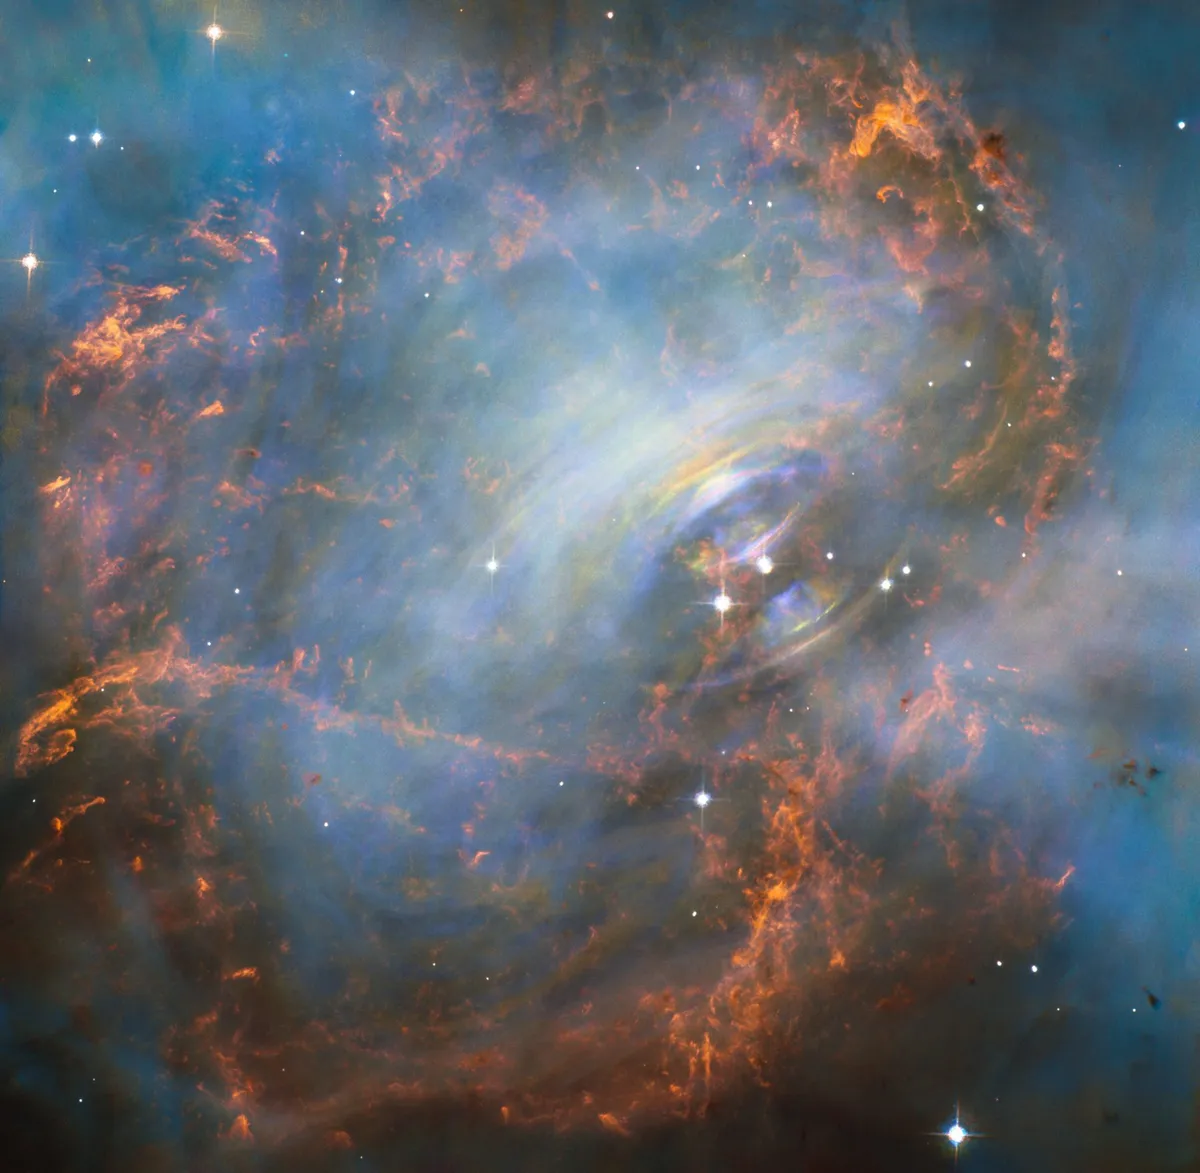 A pulsar lies at the very heart of the Crab Nebula, seen in this image captured by the Hubble Space Telescope. Credit: NASA and ESA; Acknowledgment: J. Hester (ASU) and M. Weisskopf (NASA/MSFC)